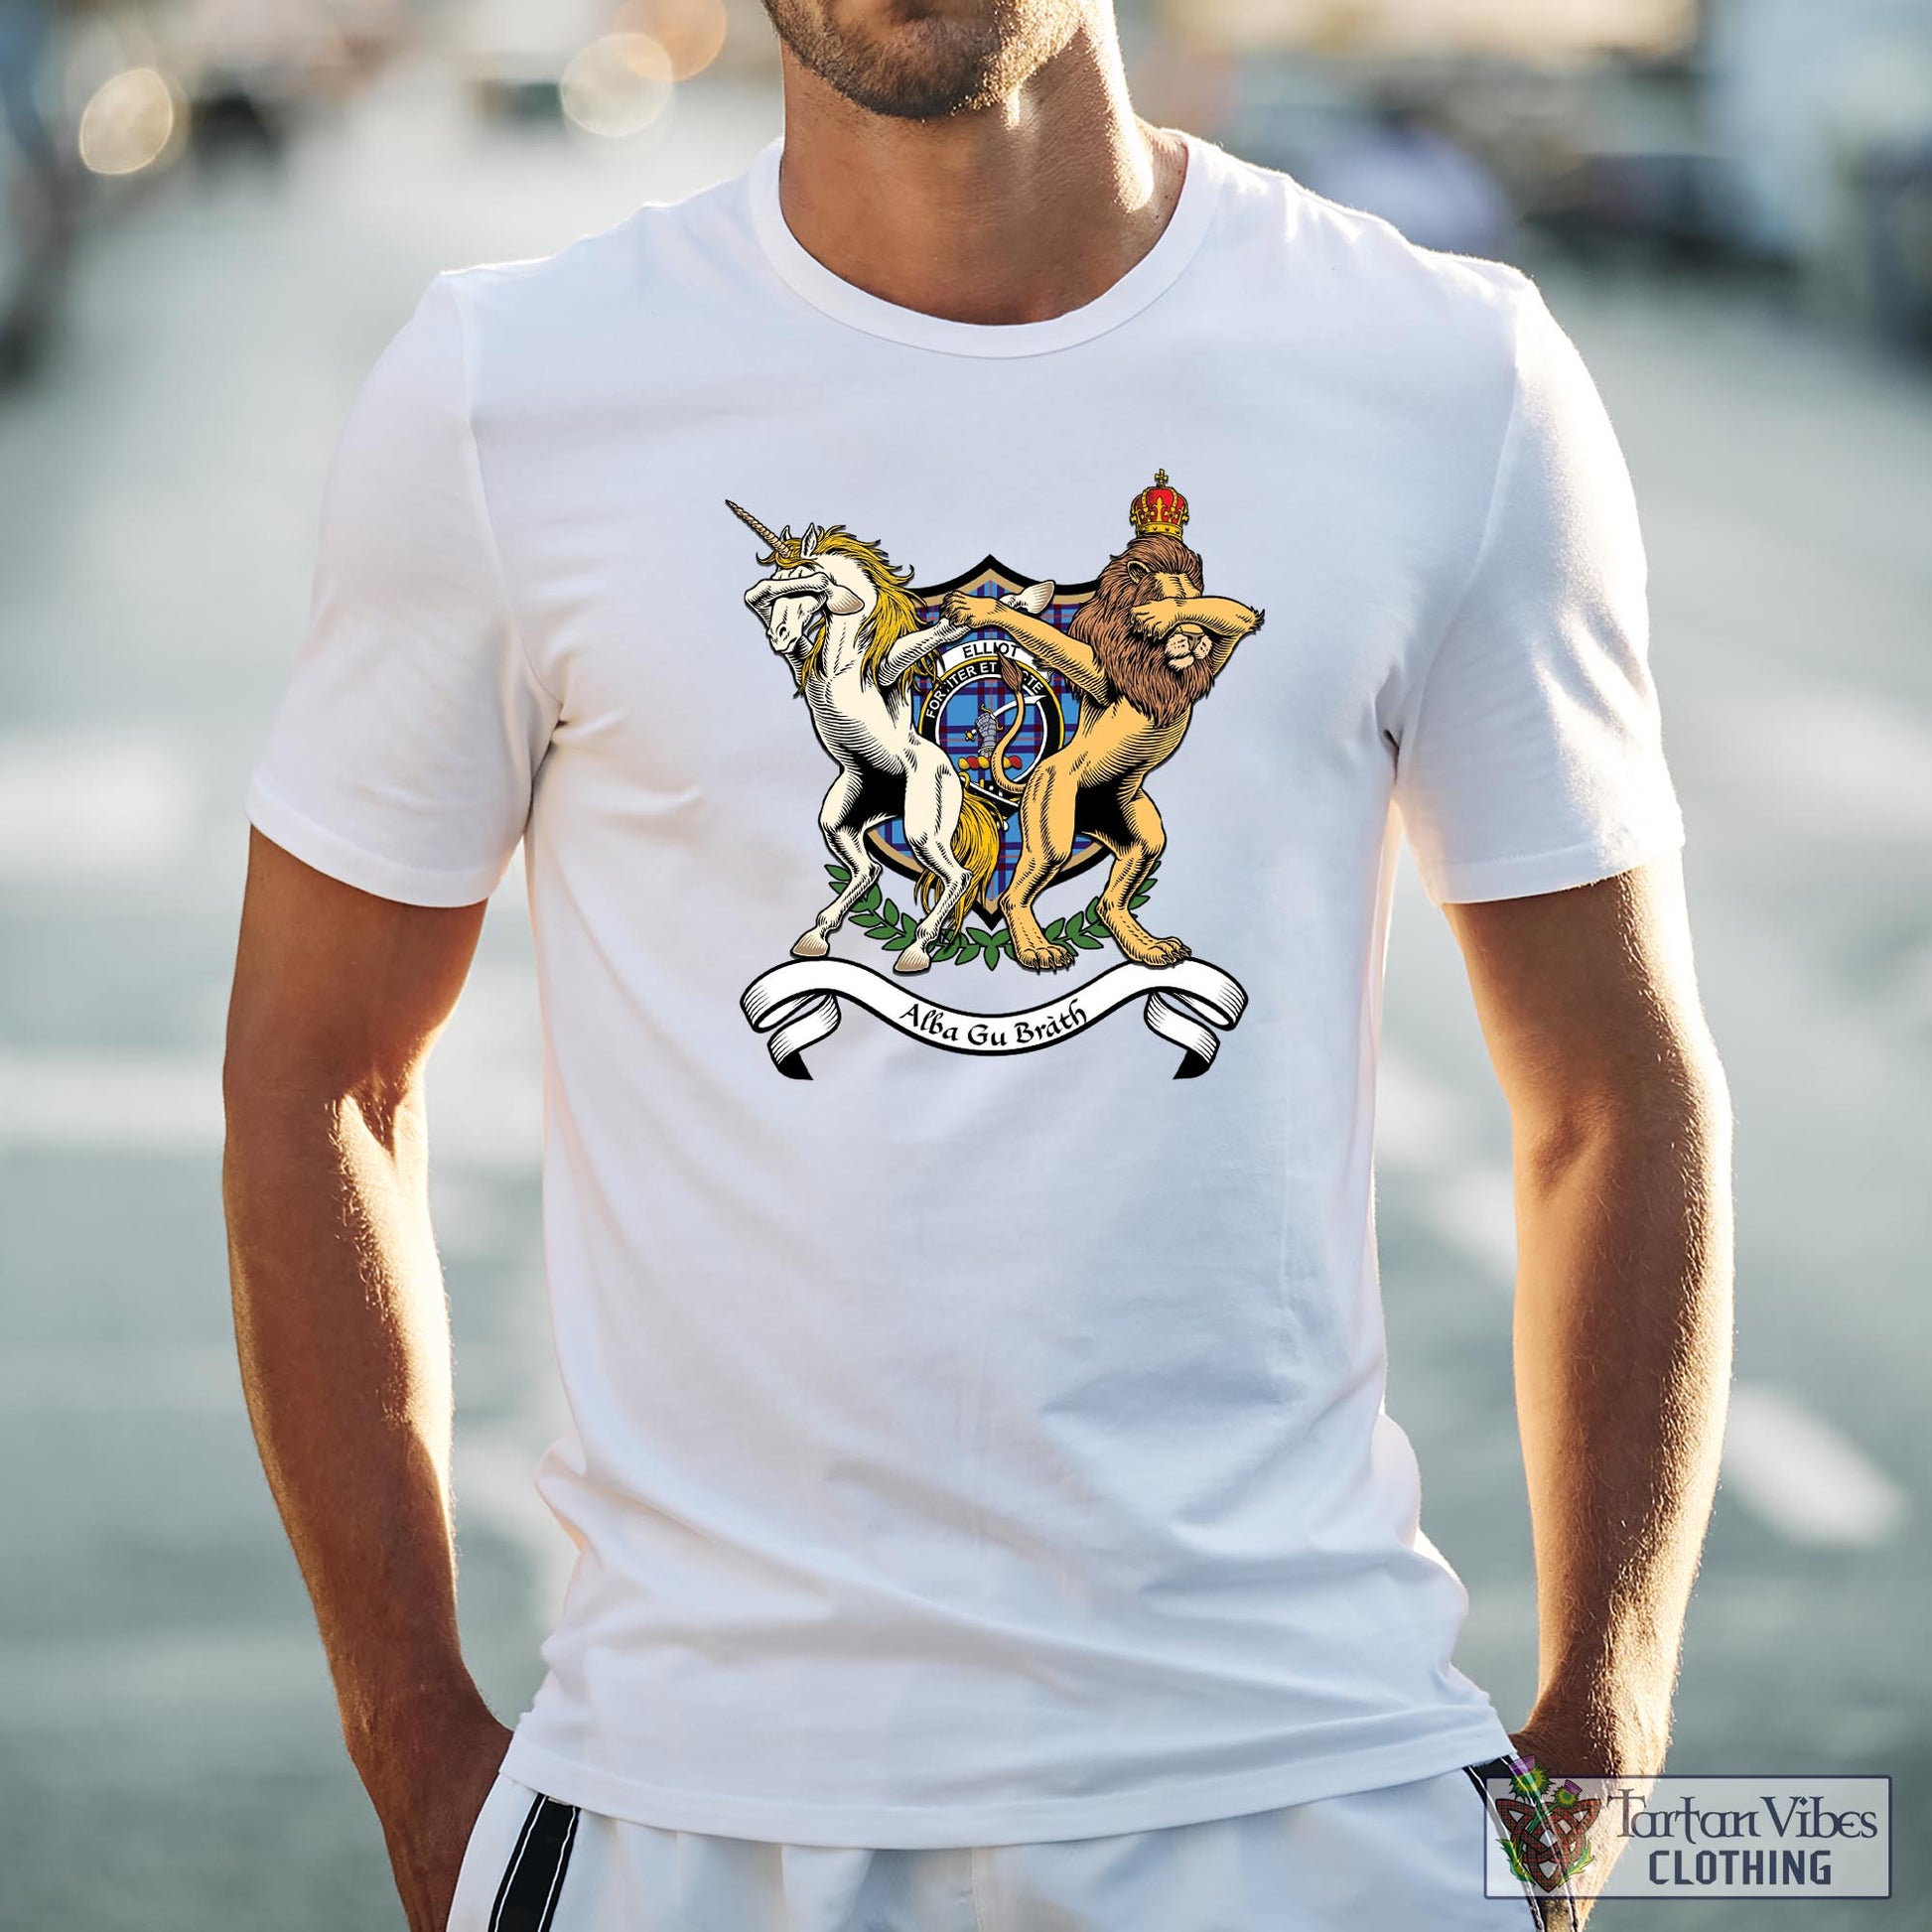 Tartan Vibes Clothing Elliot Ancient Family Crest Cotton Men's T-Shirt with Scotland Royal Coat Of Arm Funny Style